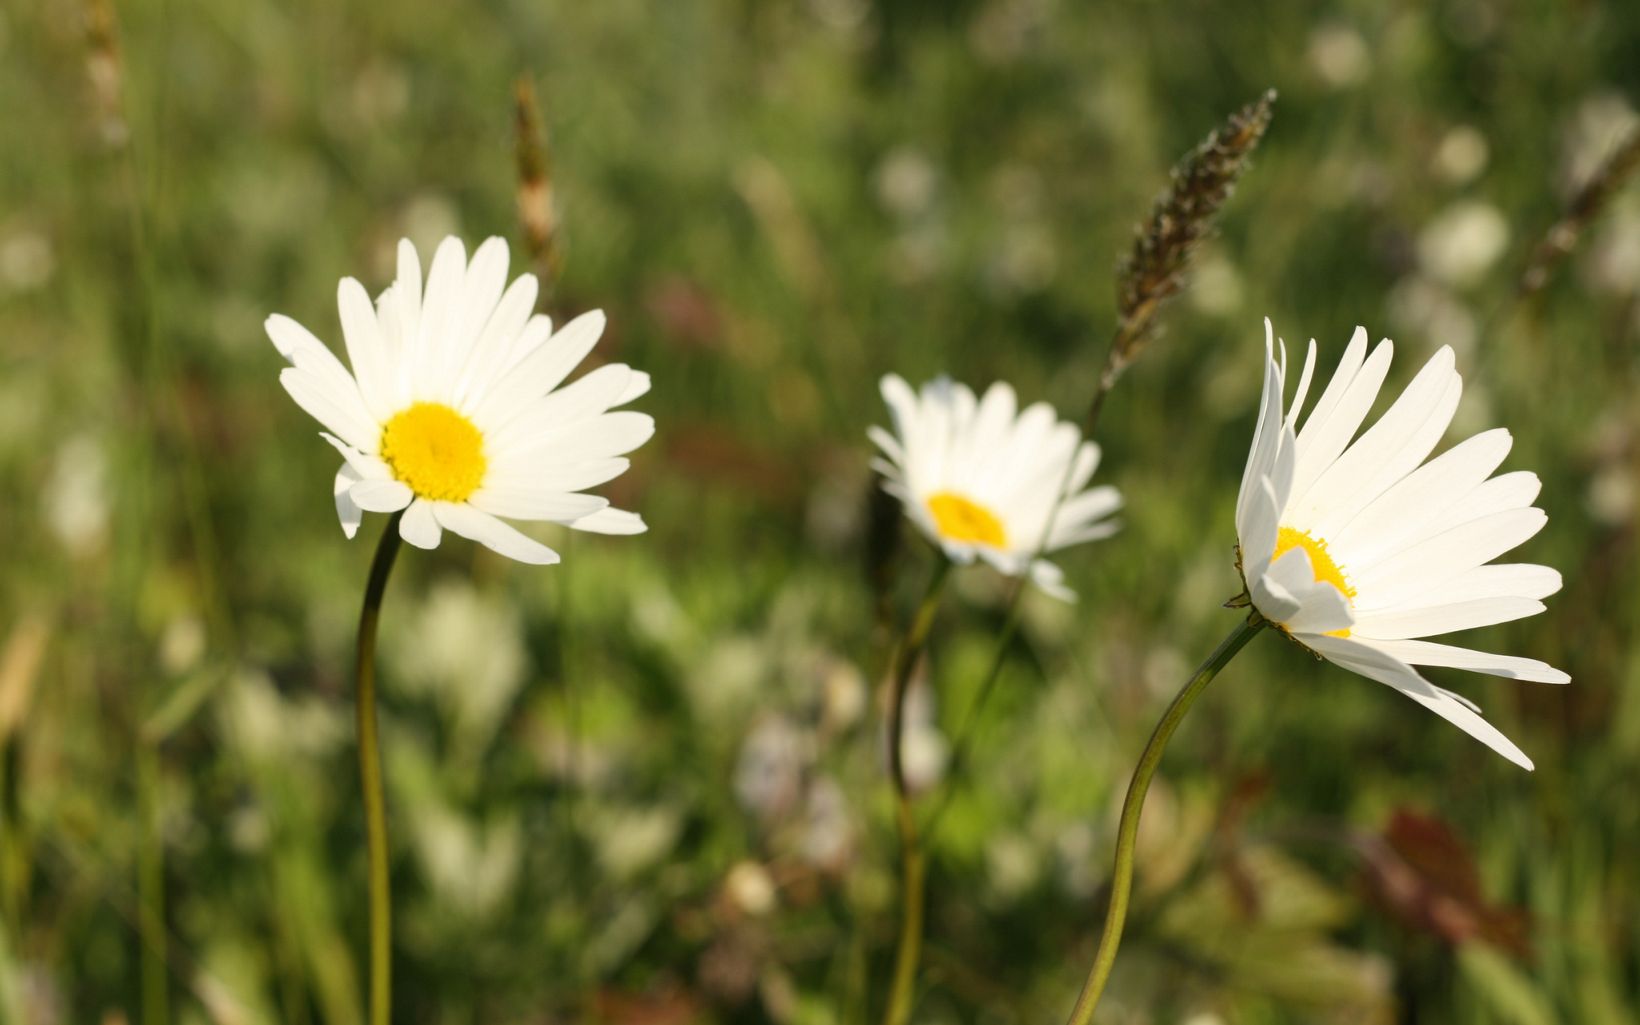 Three small white daisies with yellow centers.